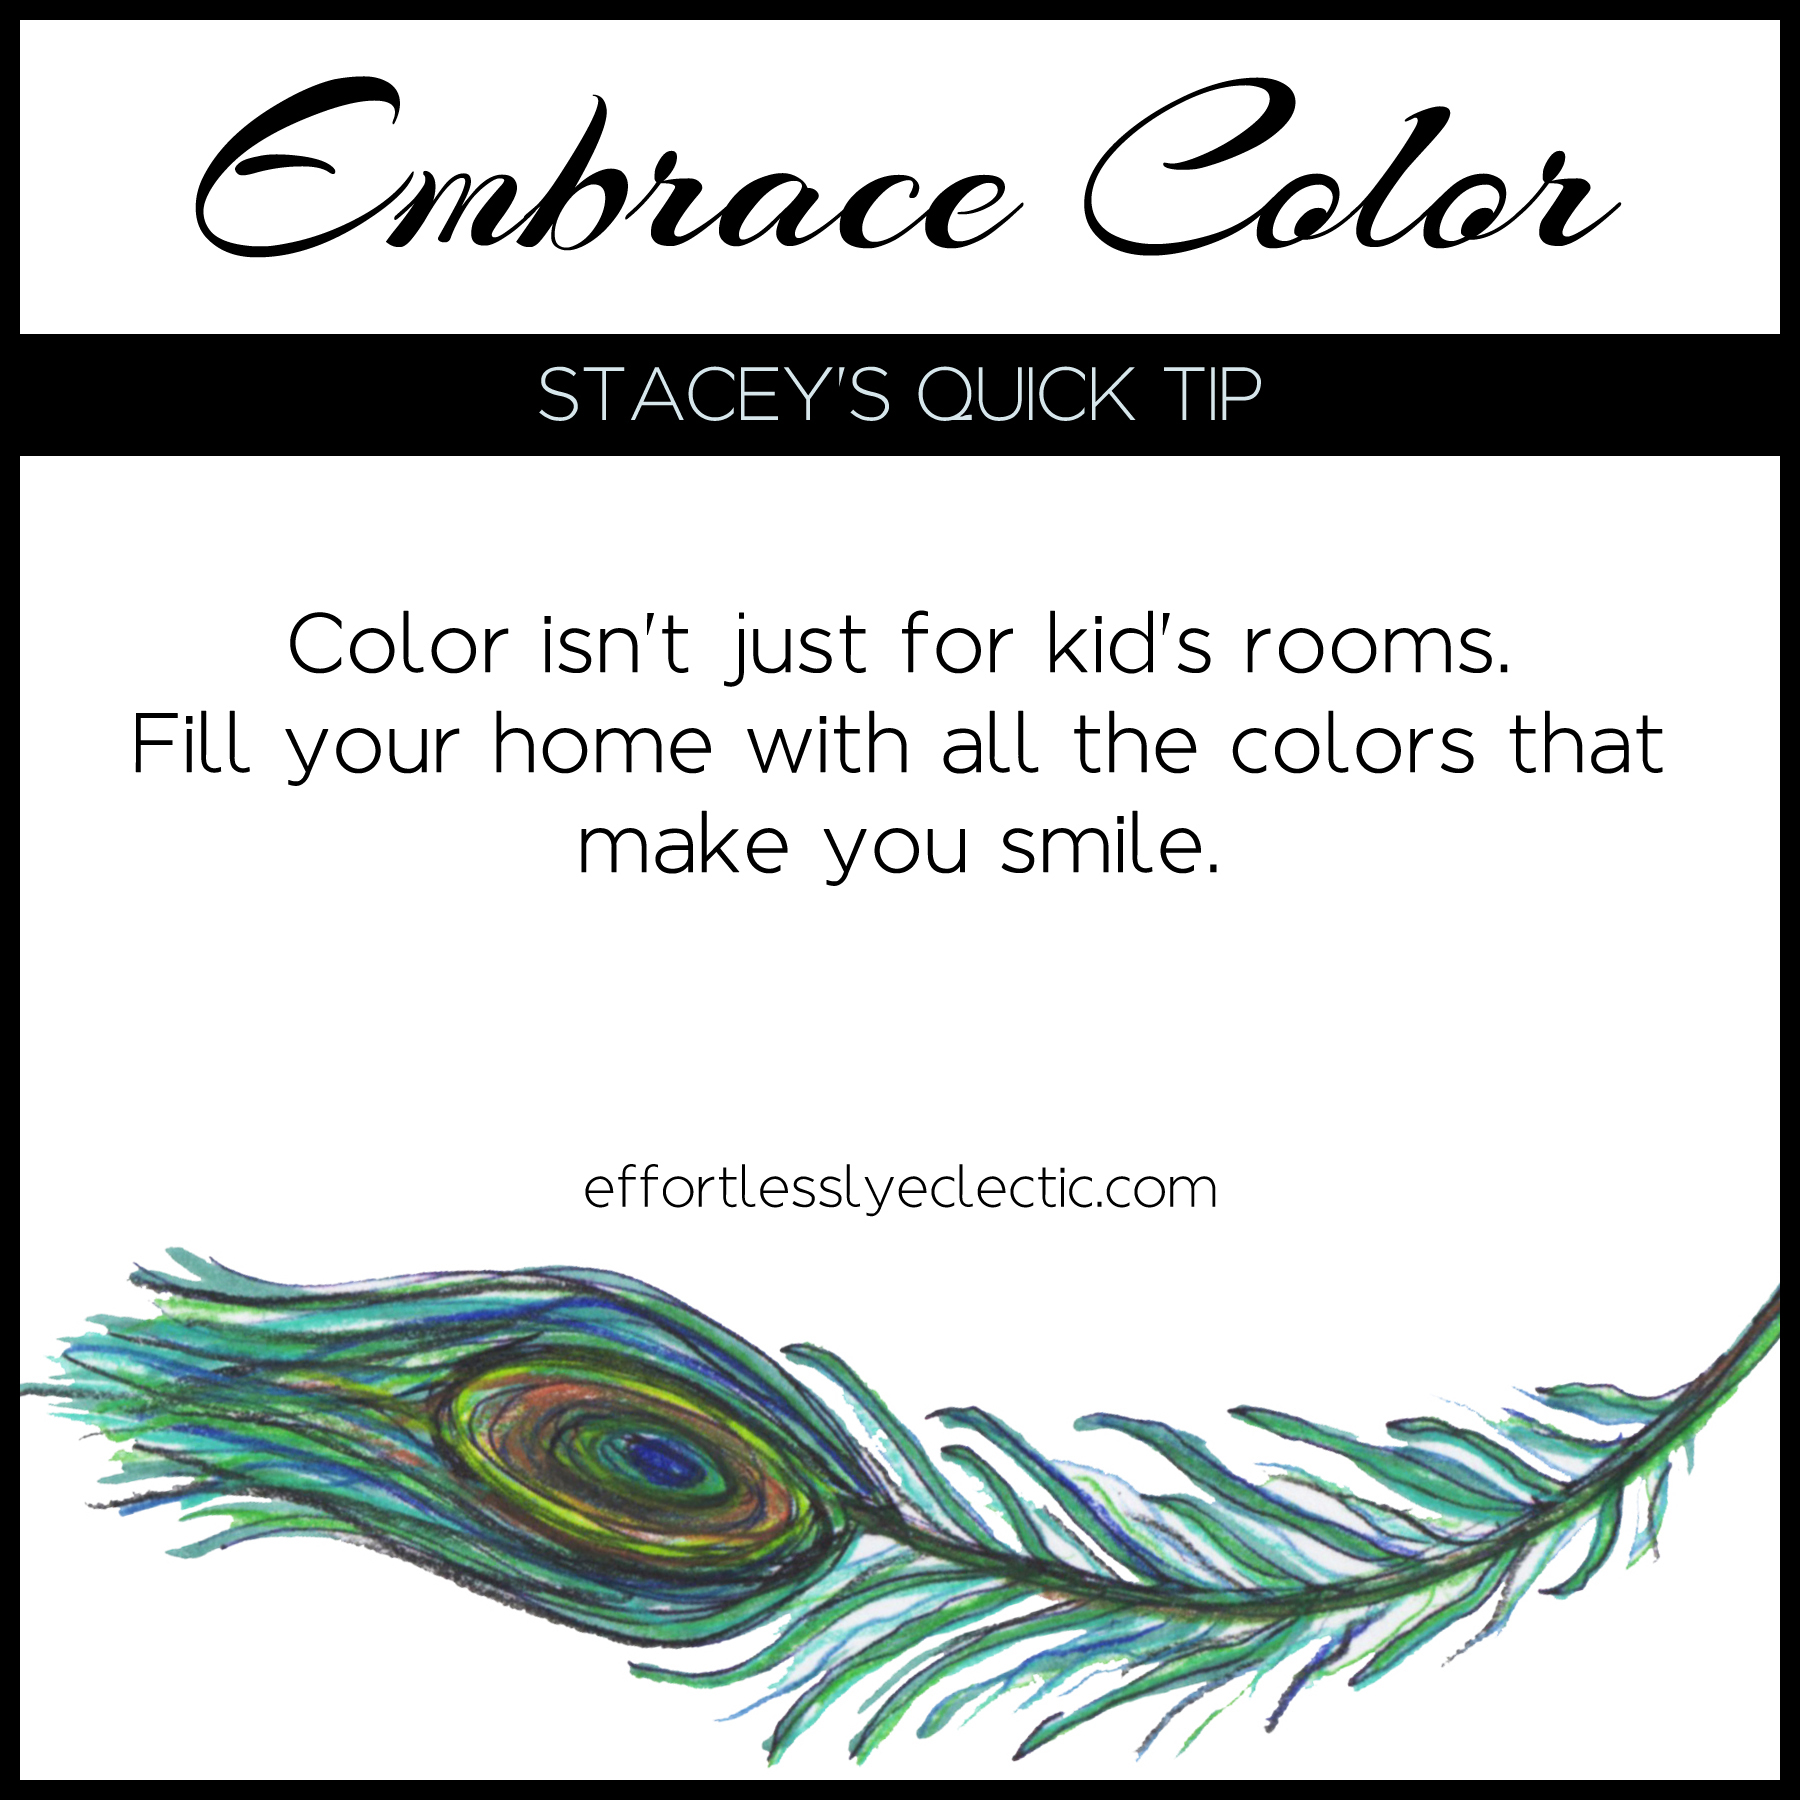 Embrace Color - A home decorating tip about adding color to your home.